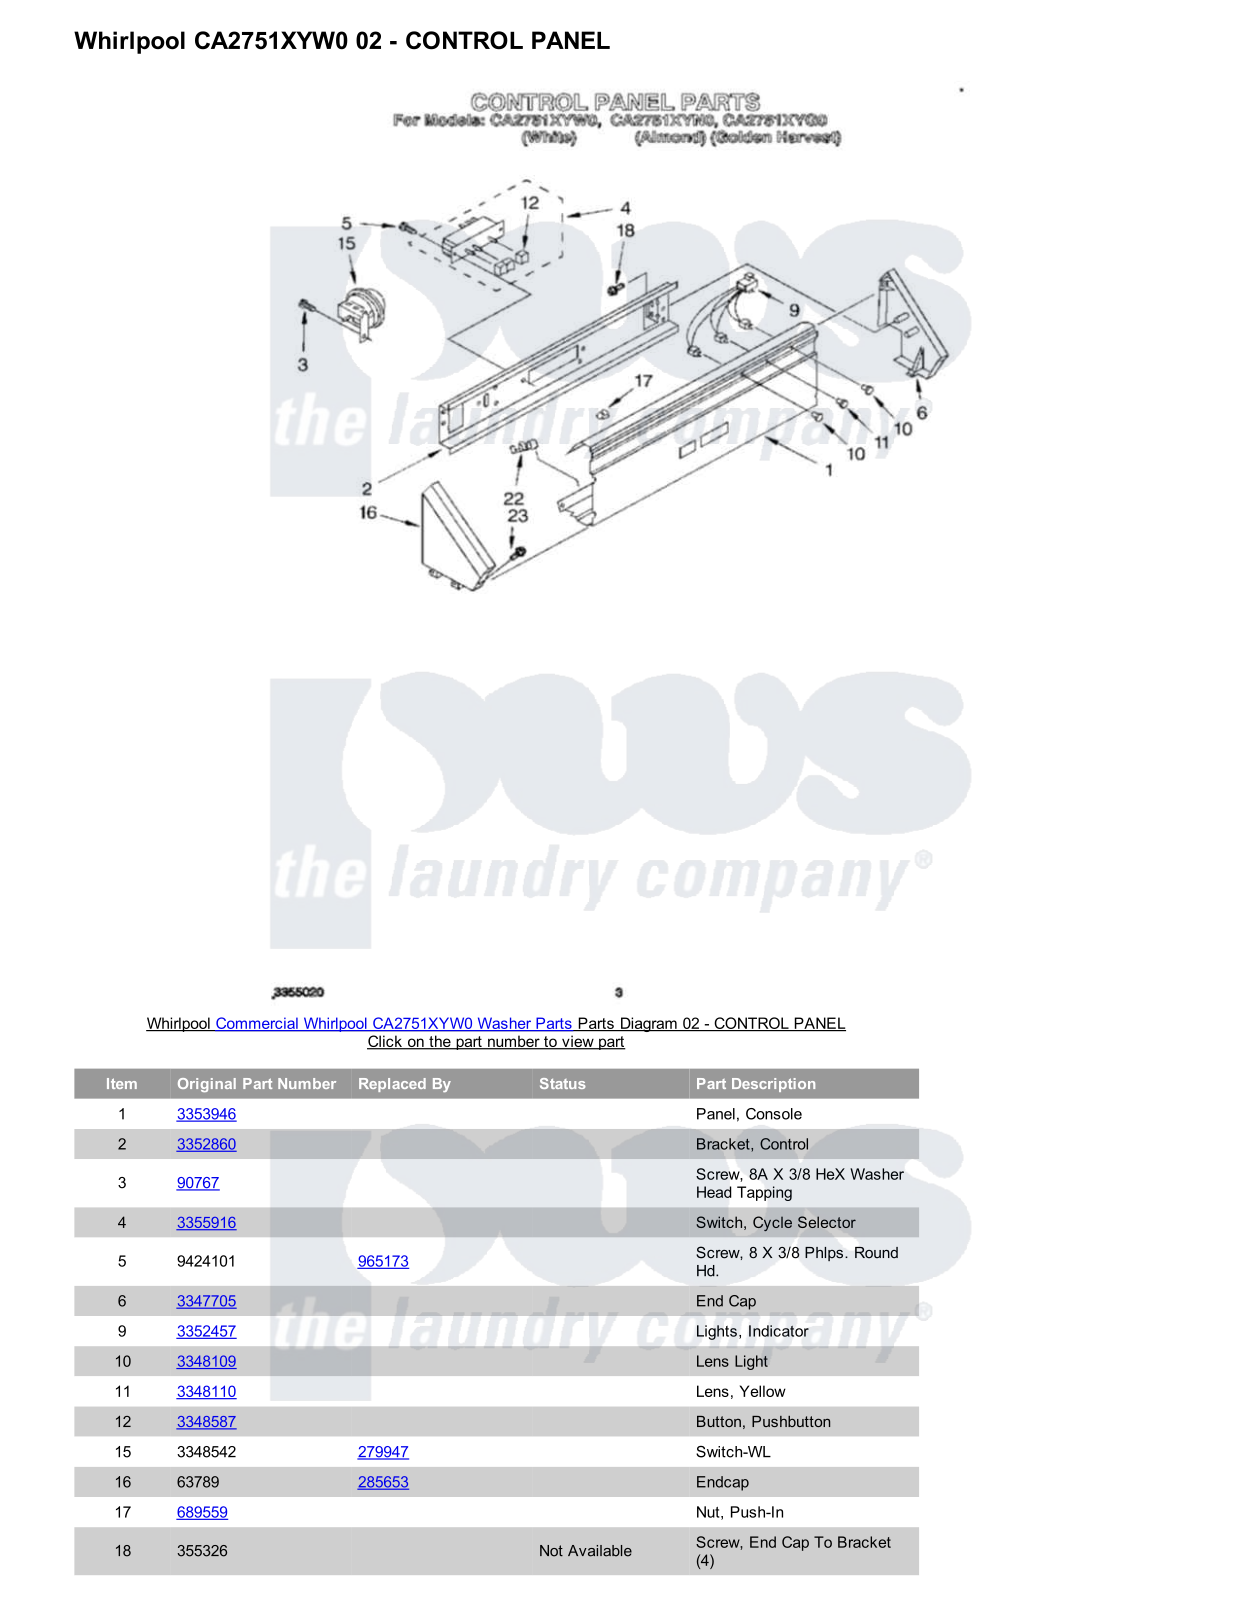 Whirlpool CA2751XYW0 Parts Diagram